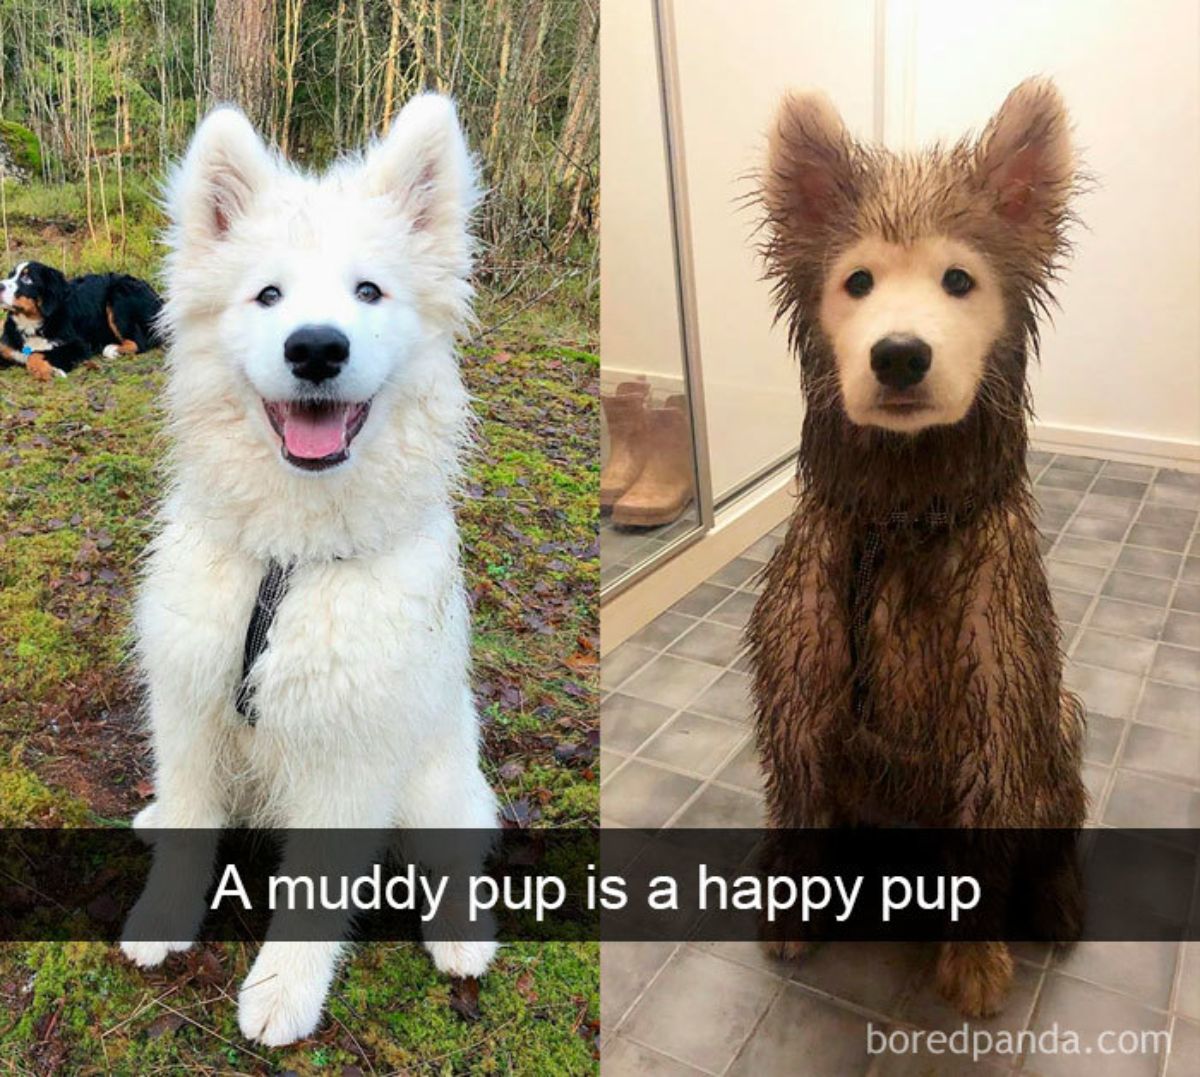 2 photos of a fluffy white pup covered in mud in the second photo with a caption saying a muddy pup is a happy pup